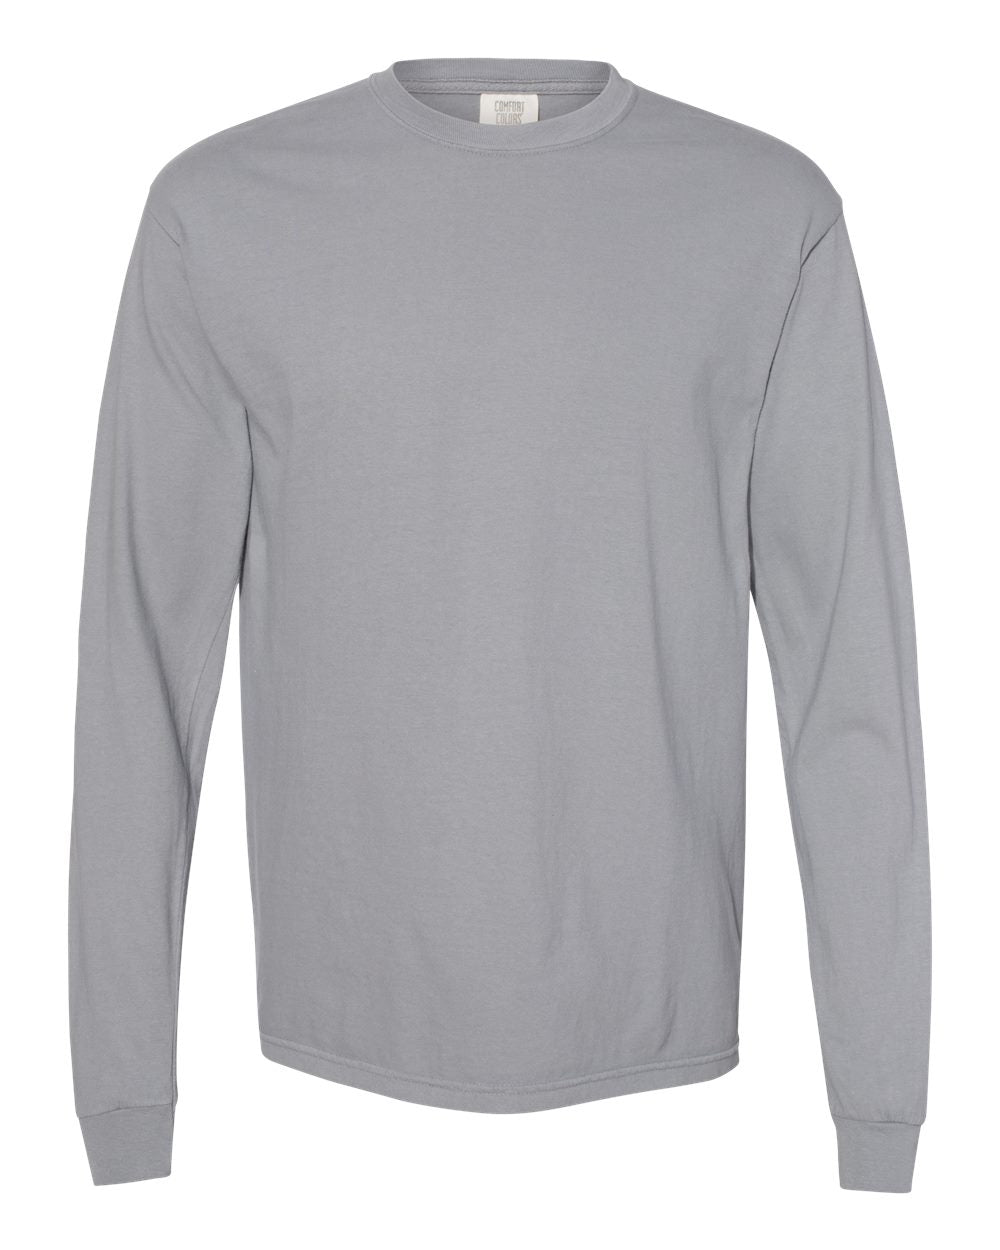 Comfort Colors Garment-Dyed Heavyweight Long Sleeve T-Shirt 6014 #color_Granite